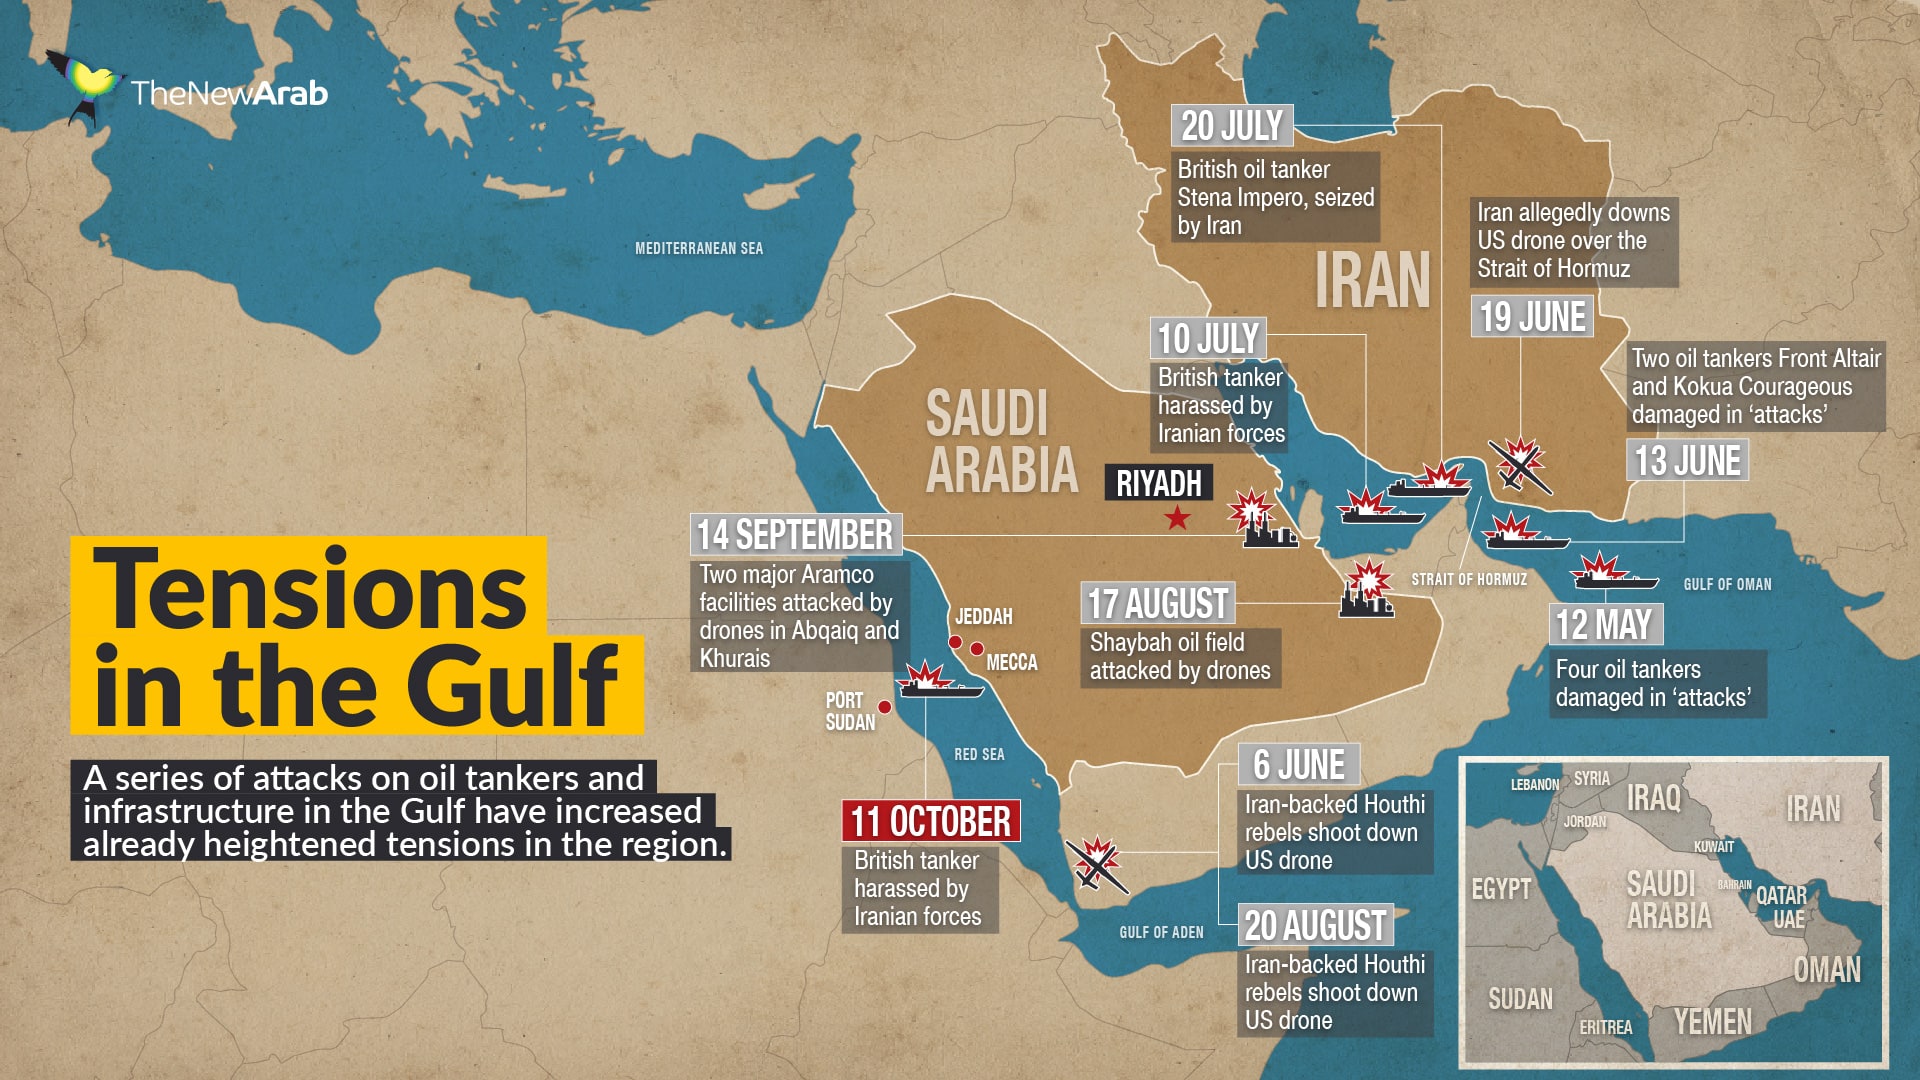 Tensions in the gulf - oil tankers_1920x1080.jpg